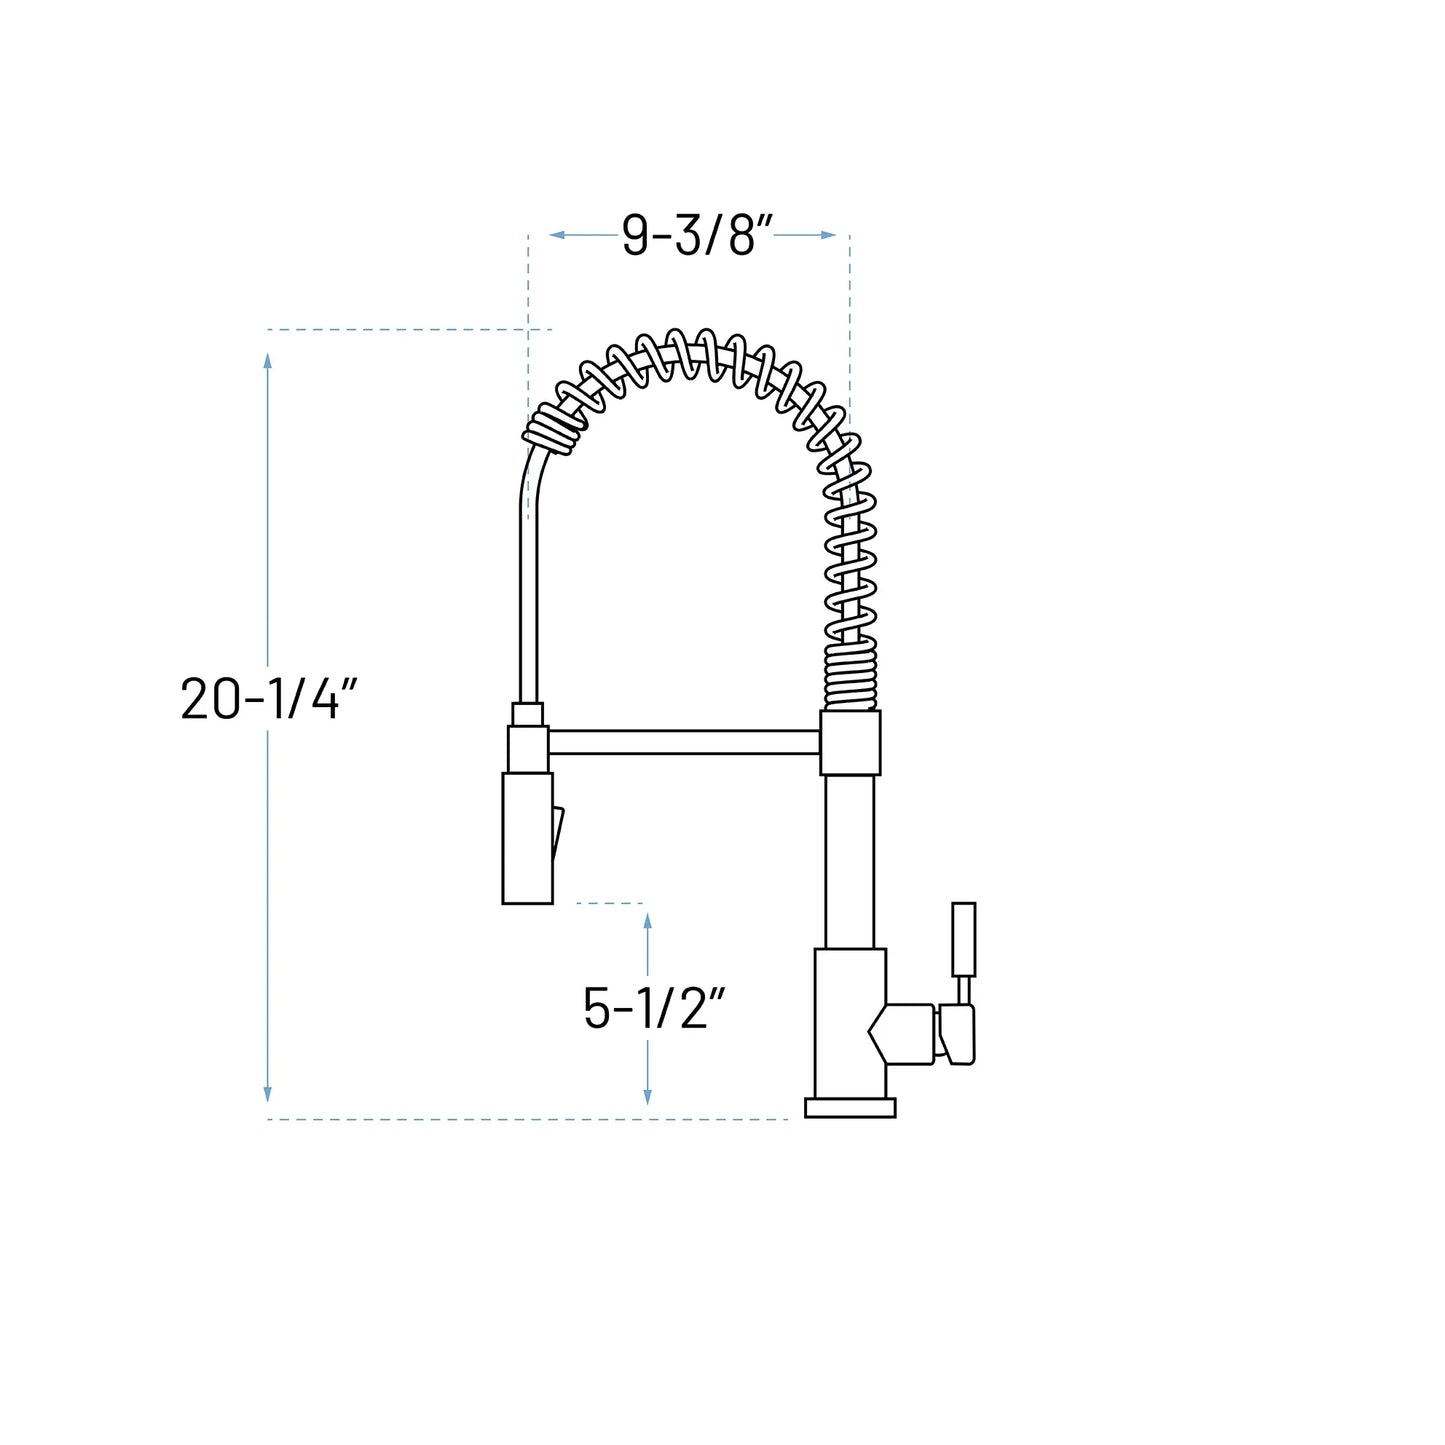 A-807-BN Single Handle Pull-Down Kitchen Faucet